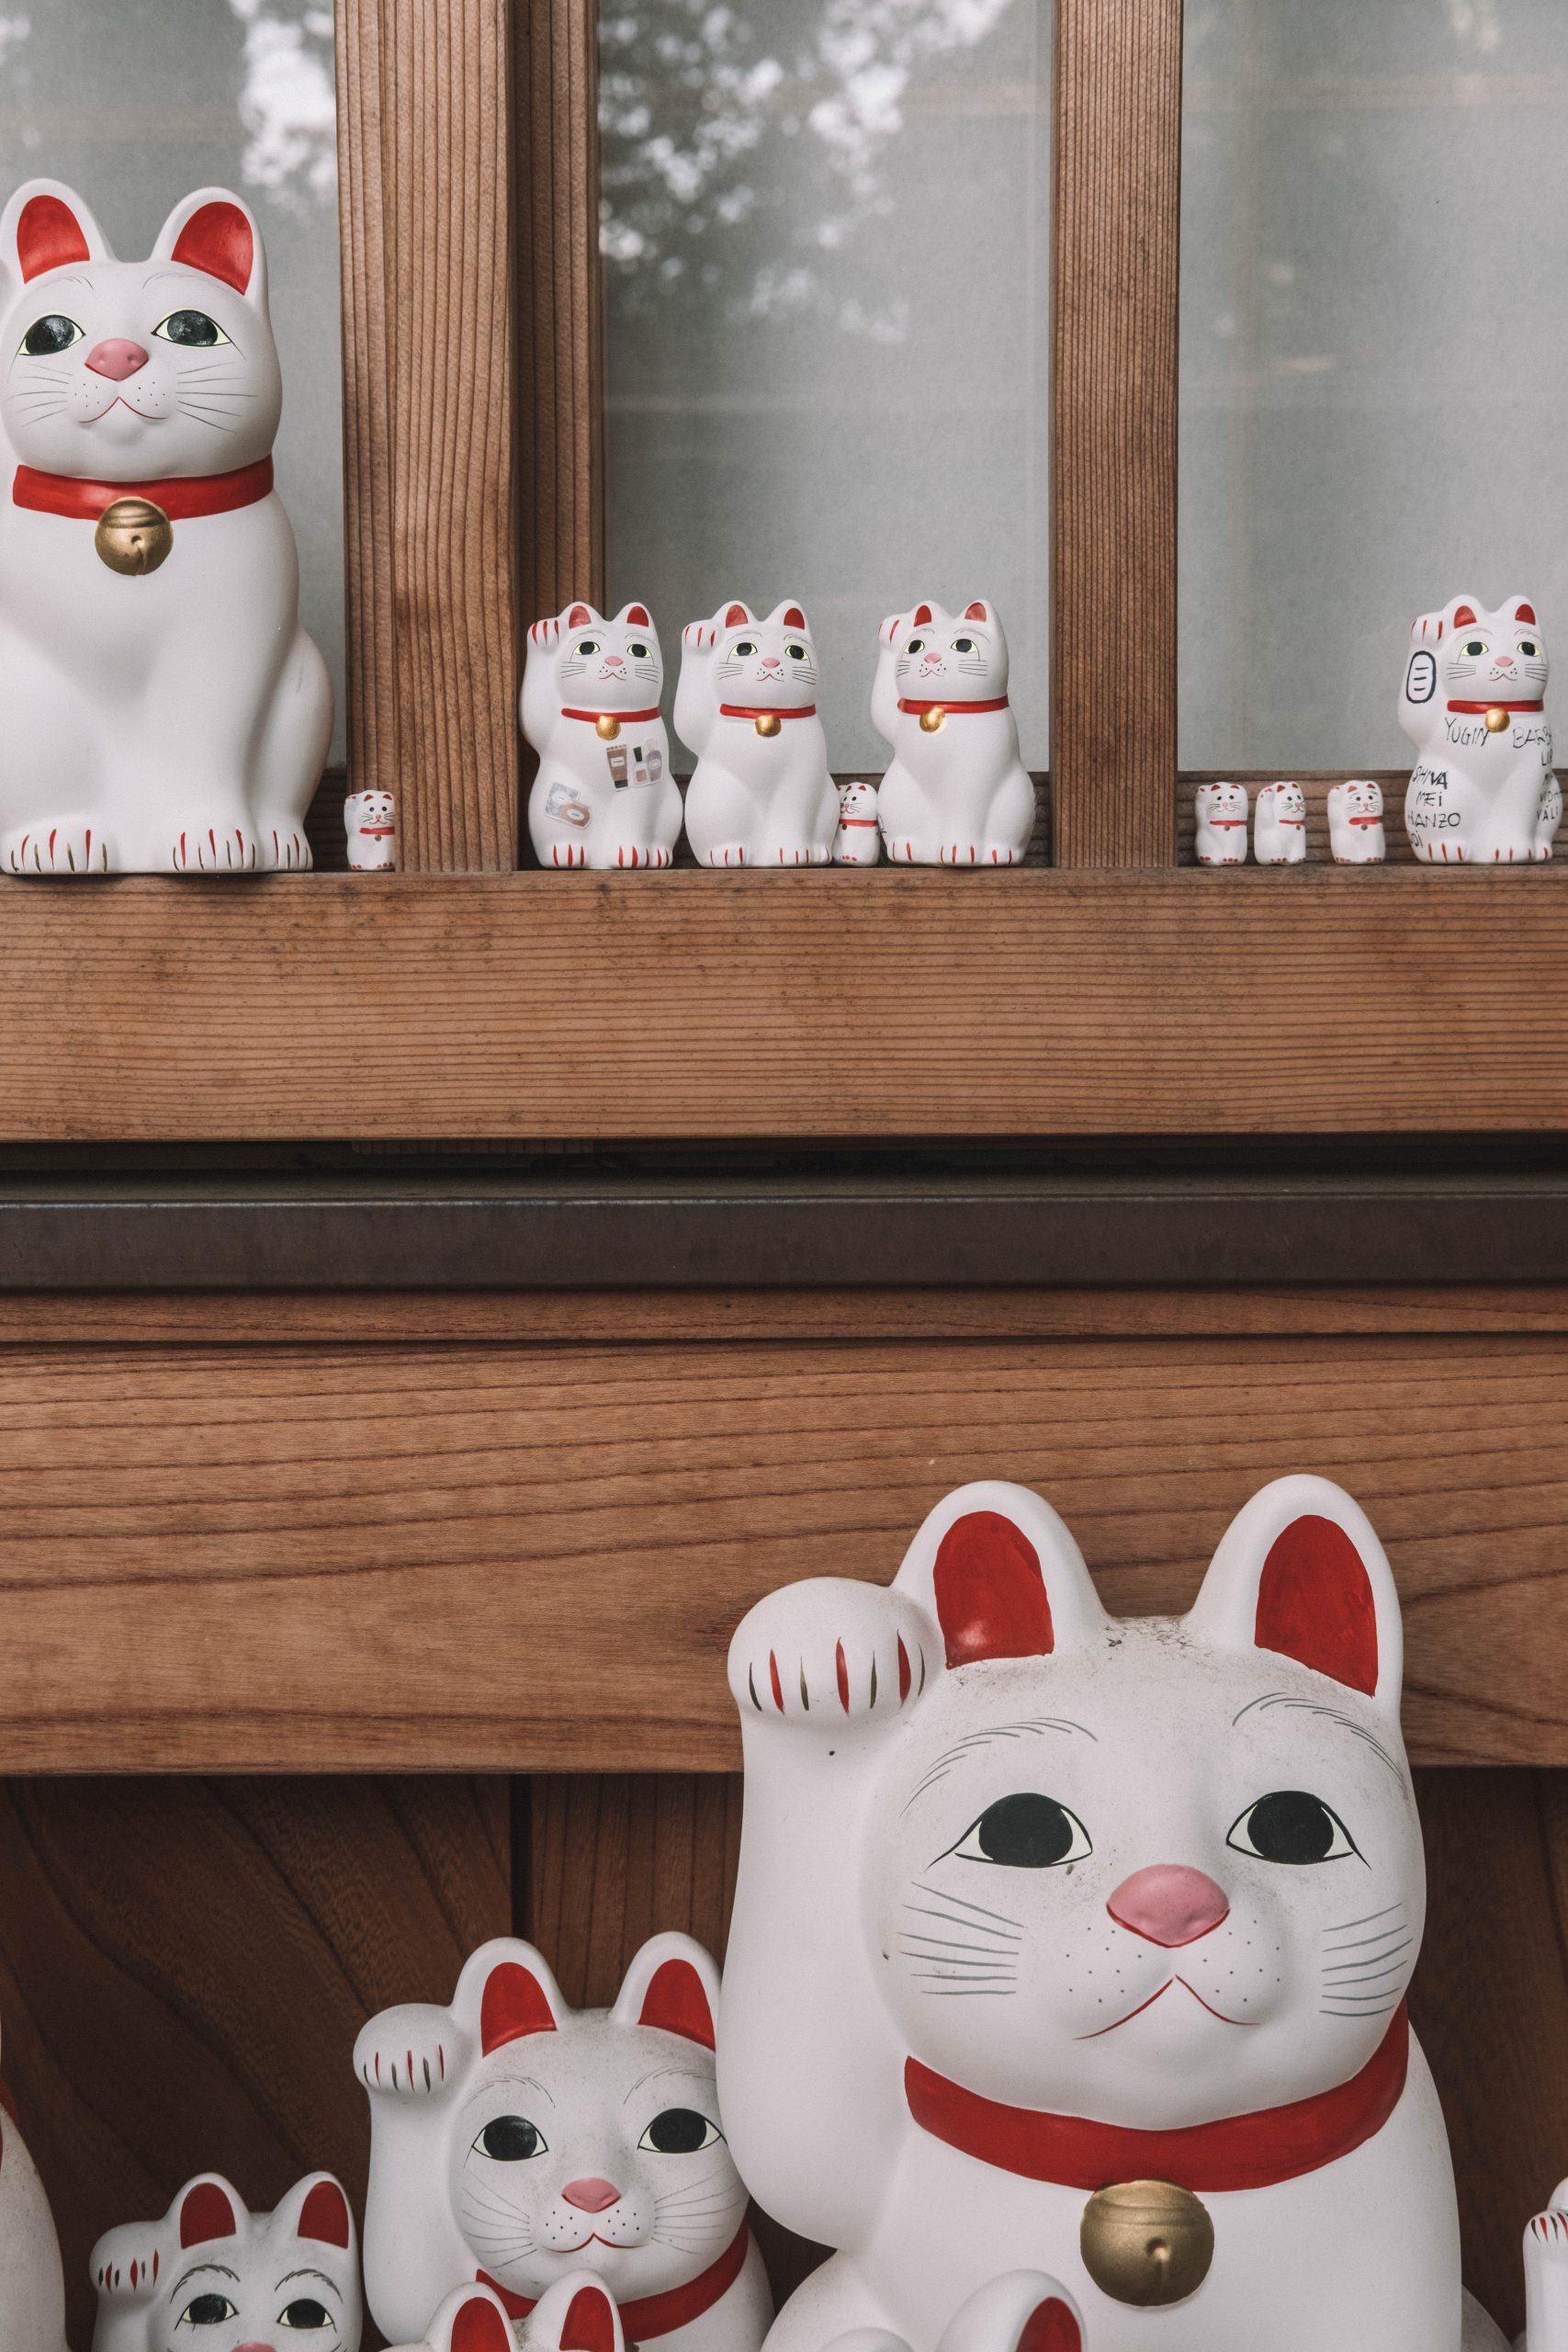 Cat figurines with messages on them at Gotokuji temple